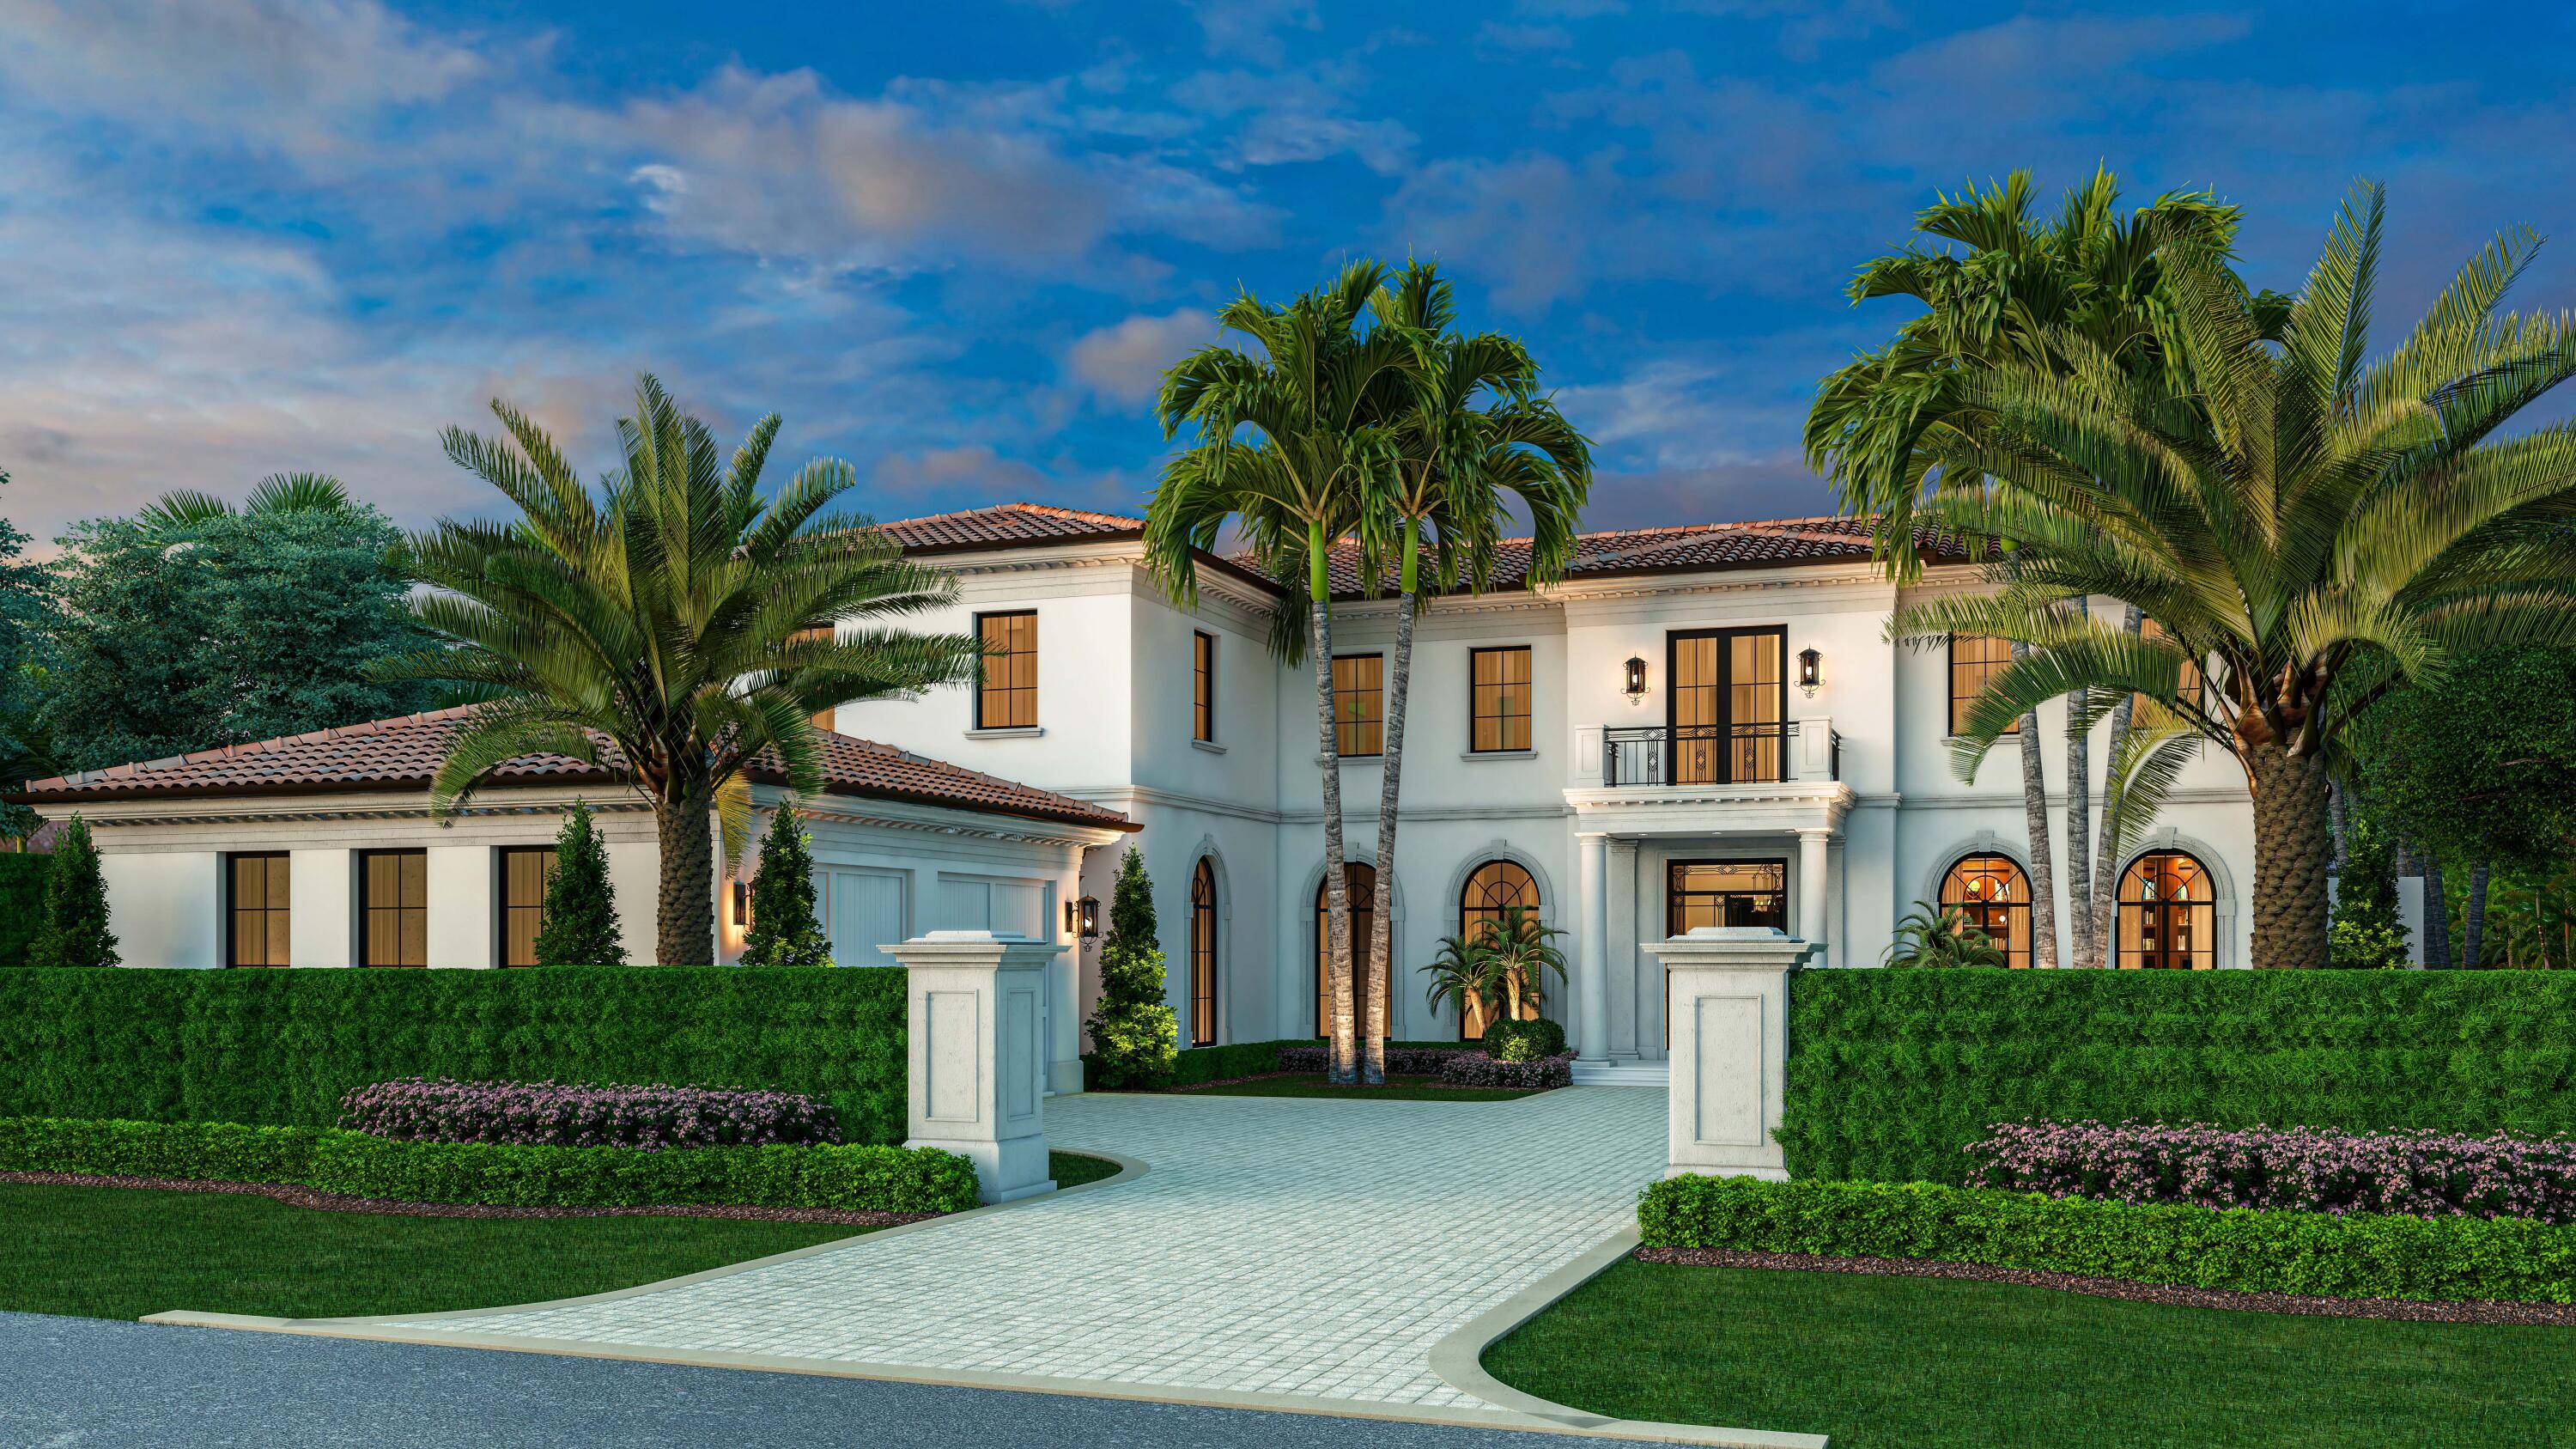 Classic Palm Beach architecture that recalls sophisticated Island Bermuda styling, this 9, 100 TSF new construction estate is currently ready for an owner's discerning customization.